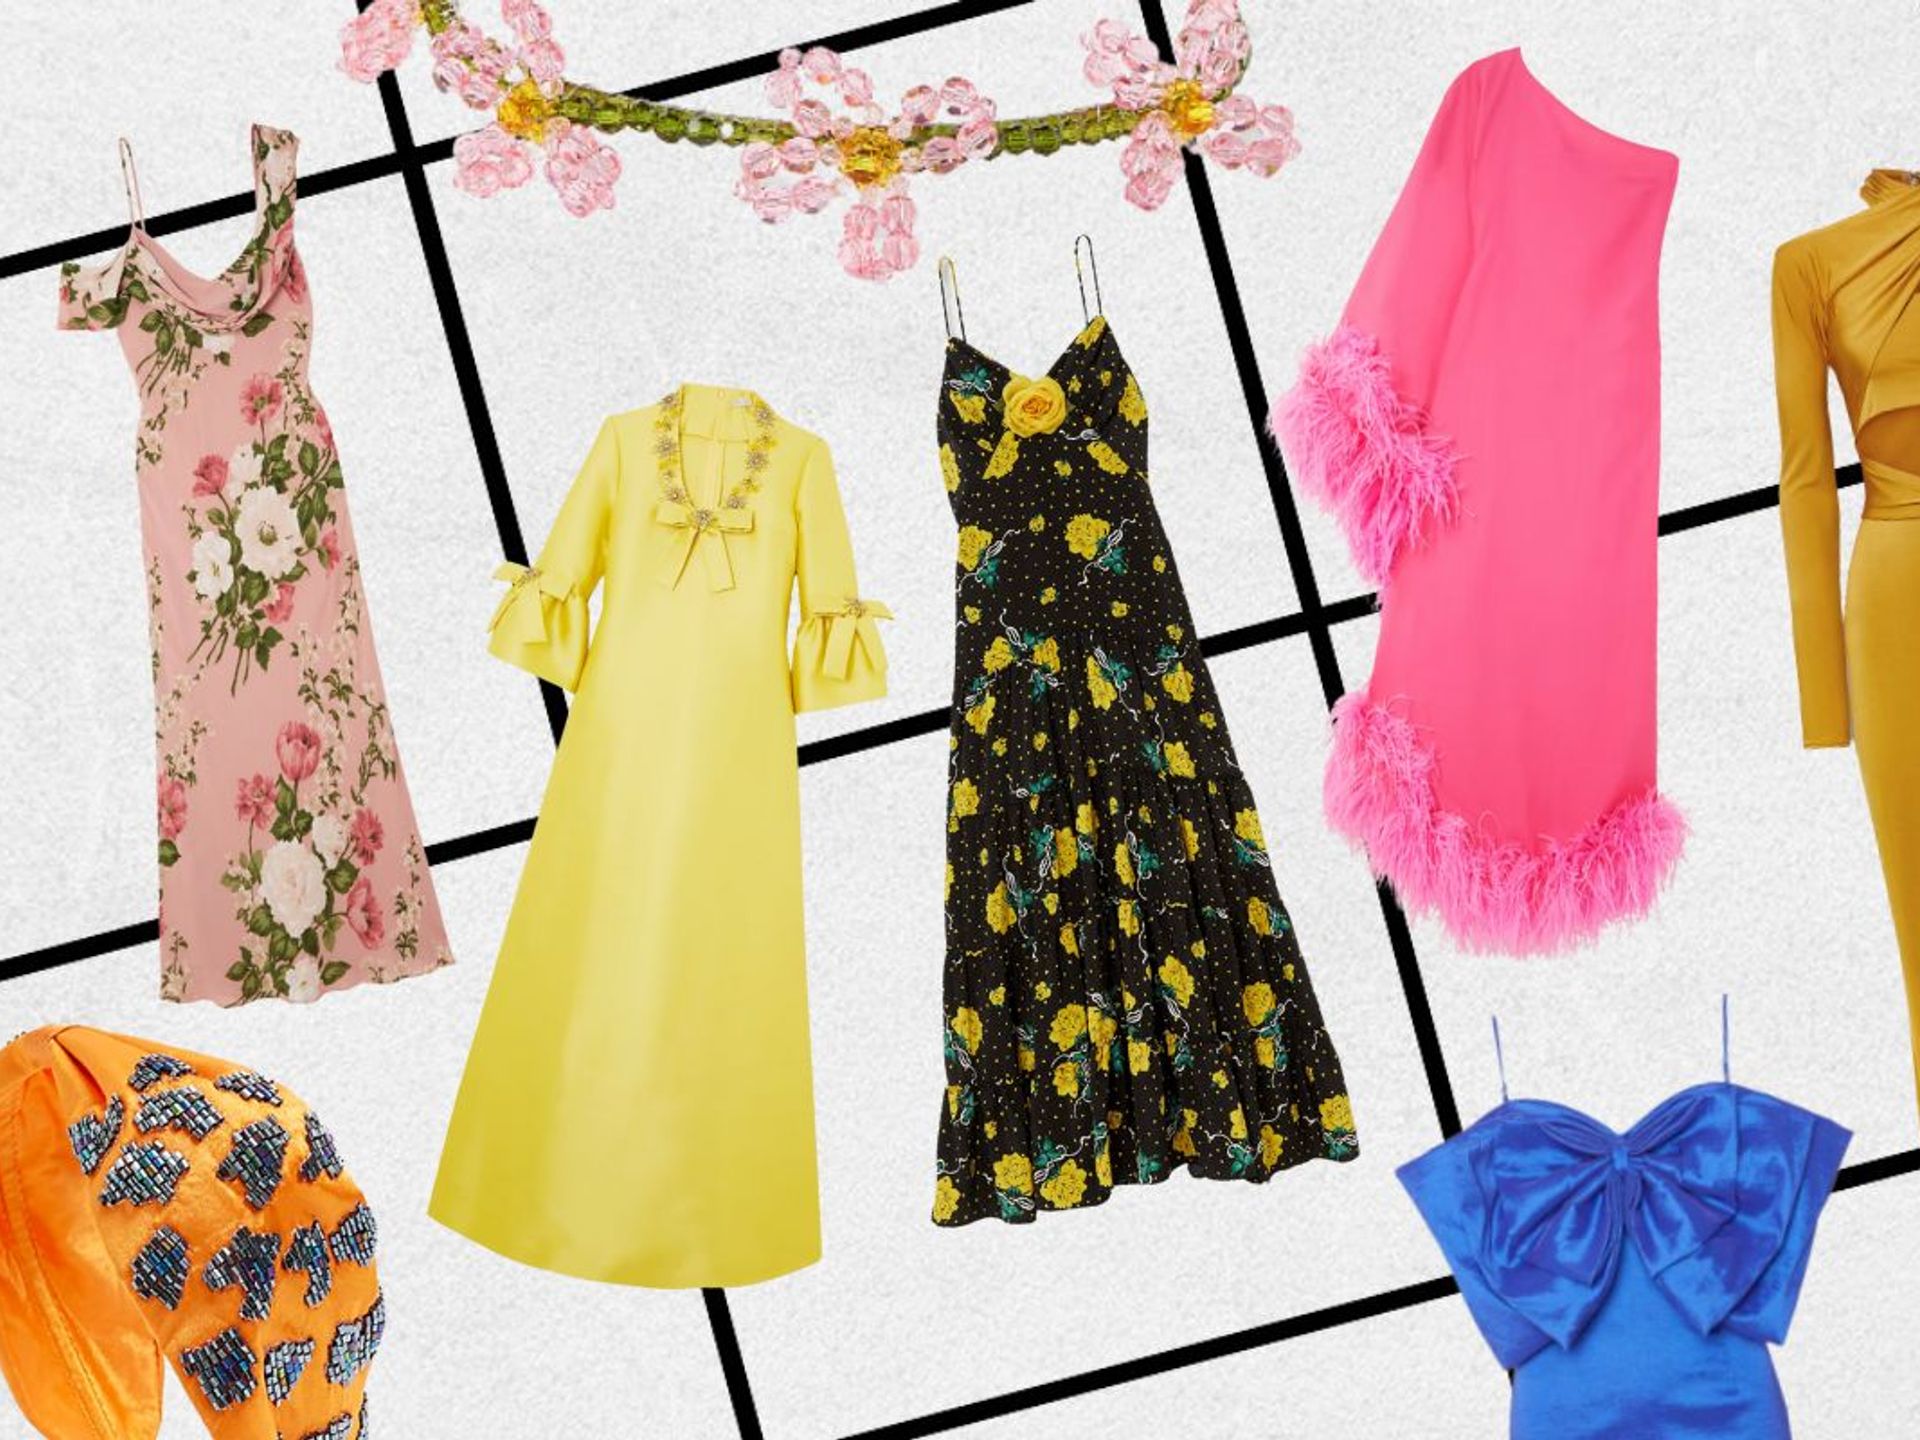 Spring Wedding Guest dresses: What to wear to look cute - The Fashionable  Maven